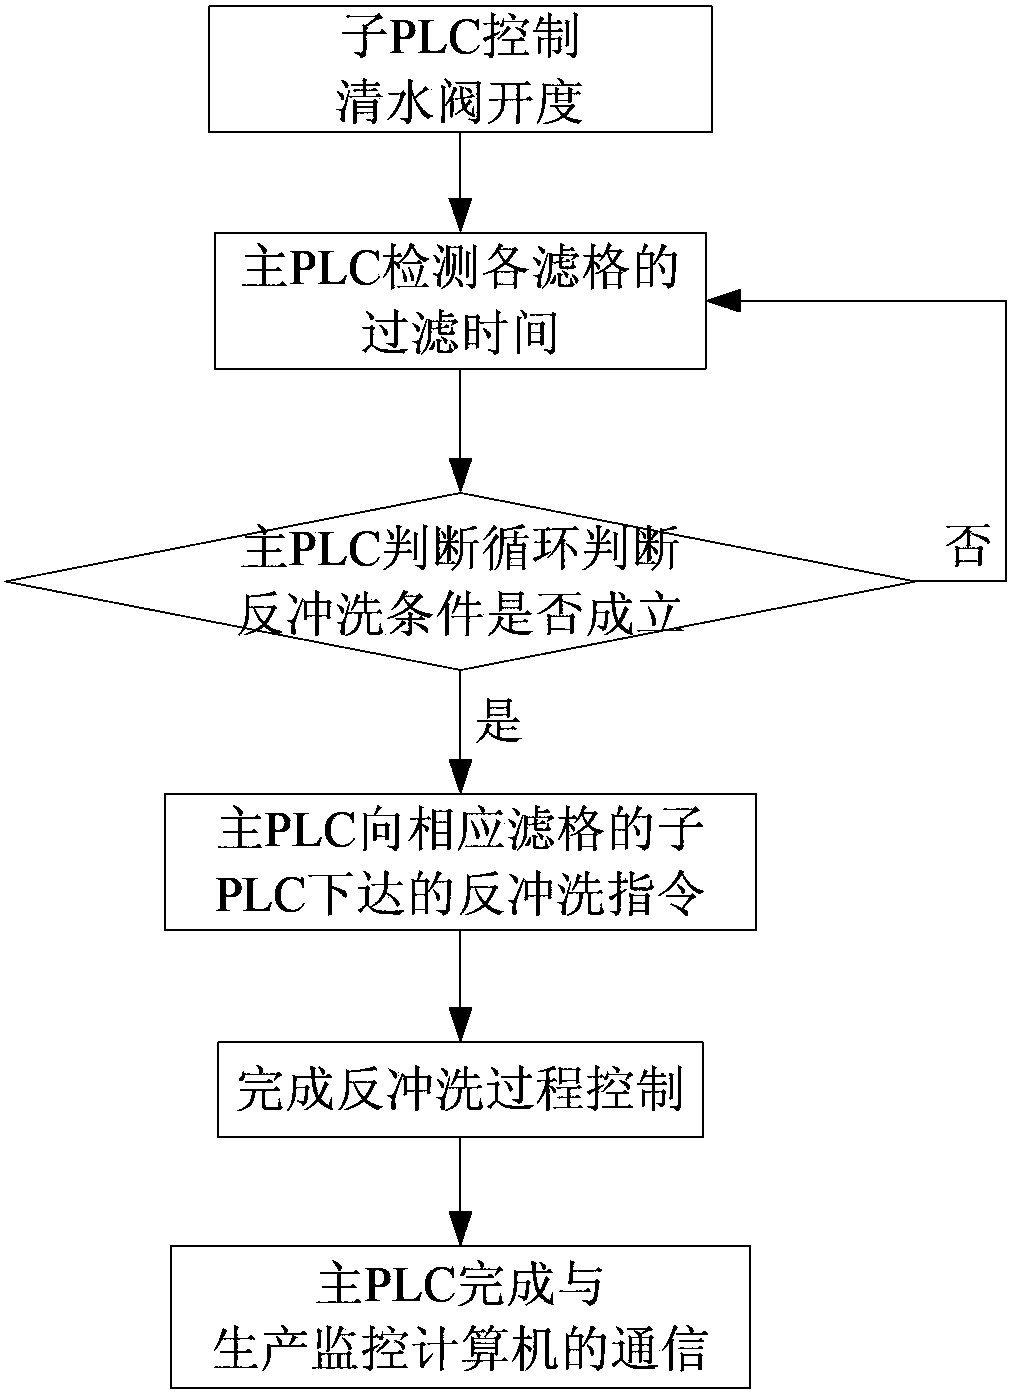 Carbon filter water quality advanced processing control method and device thereof based on dynamic PID adjusting technology